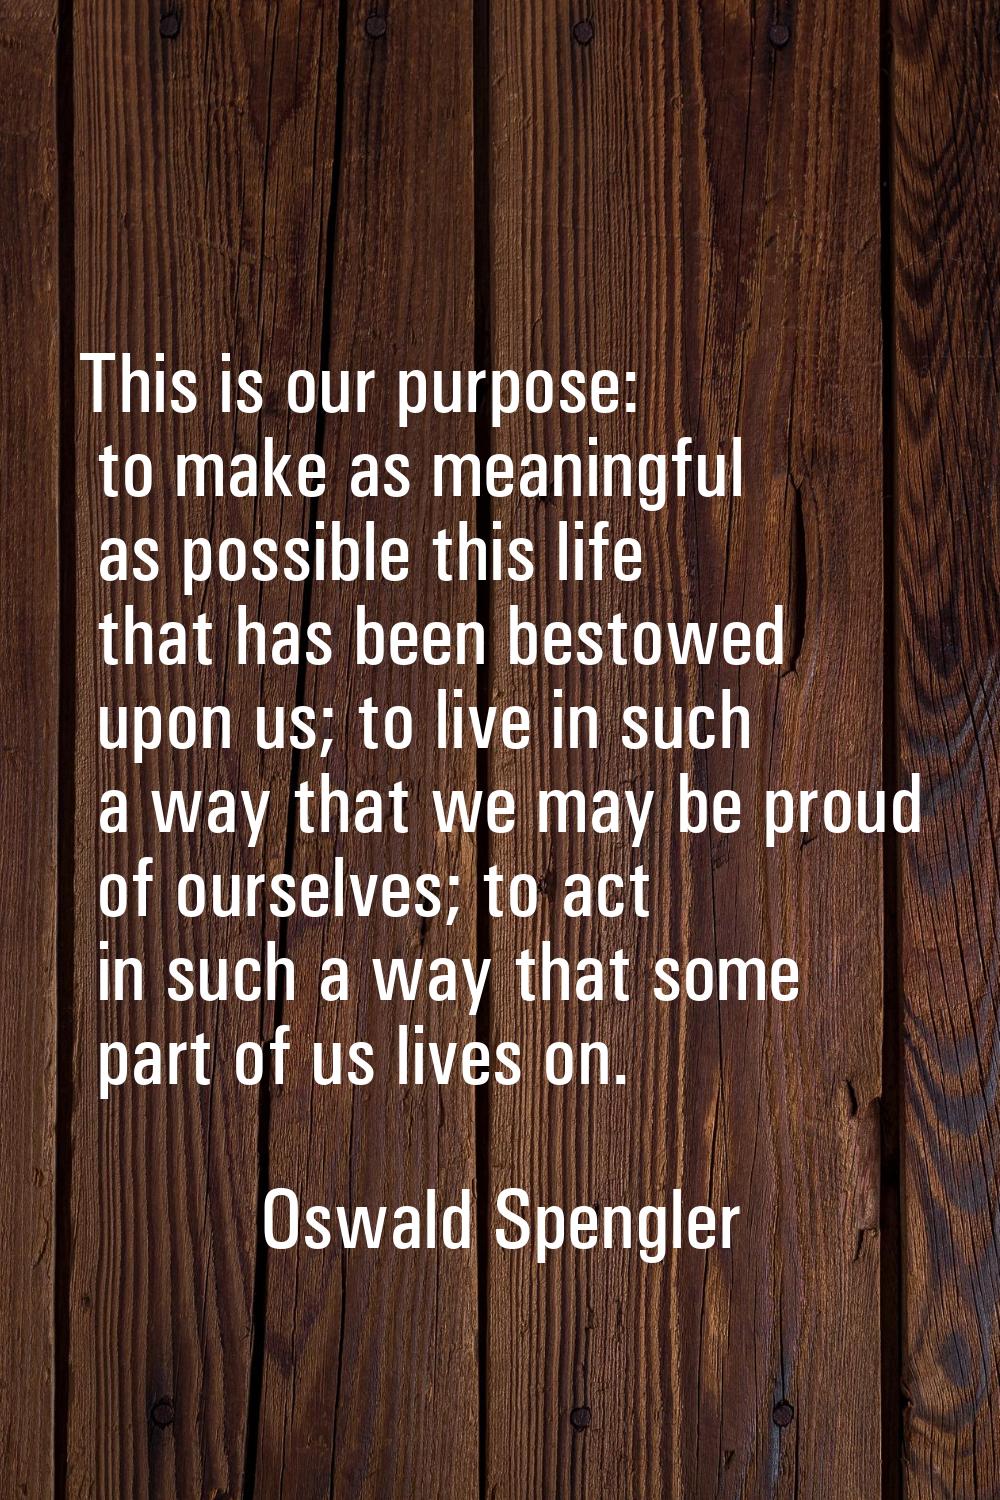 This is our purpose: to make as meaningful as possible this life that has been bestowed upon us; to